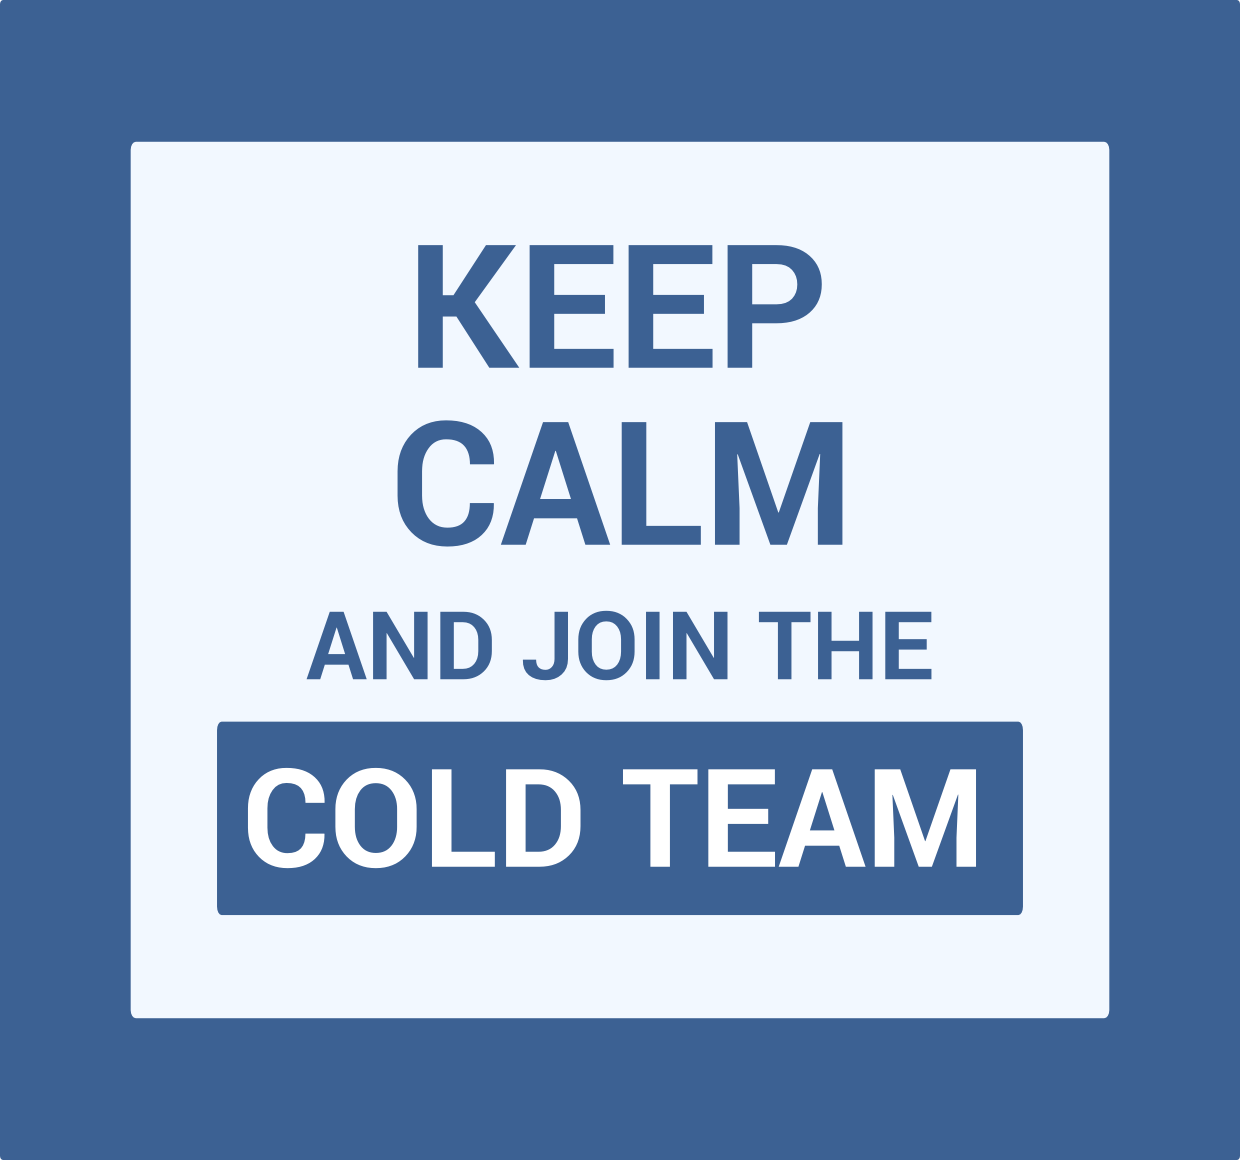 Keep Calm And Join The Cold Team!